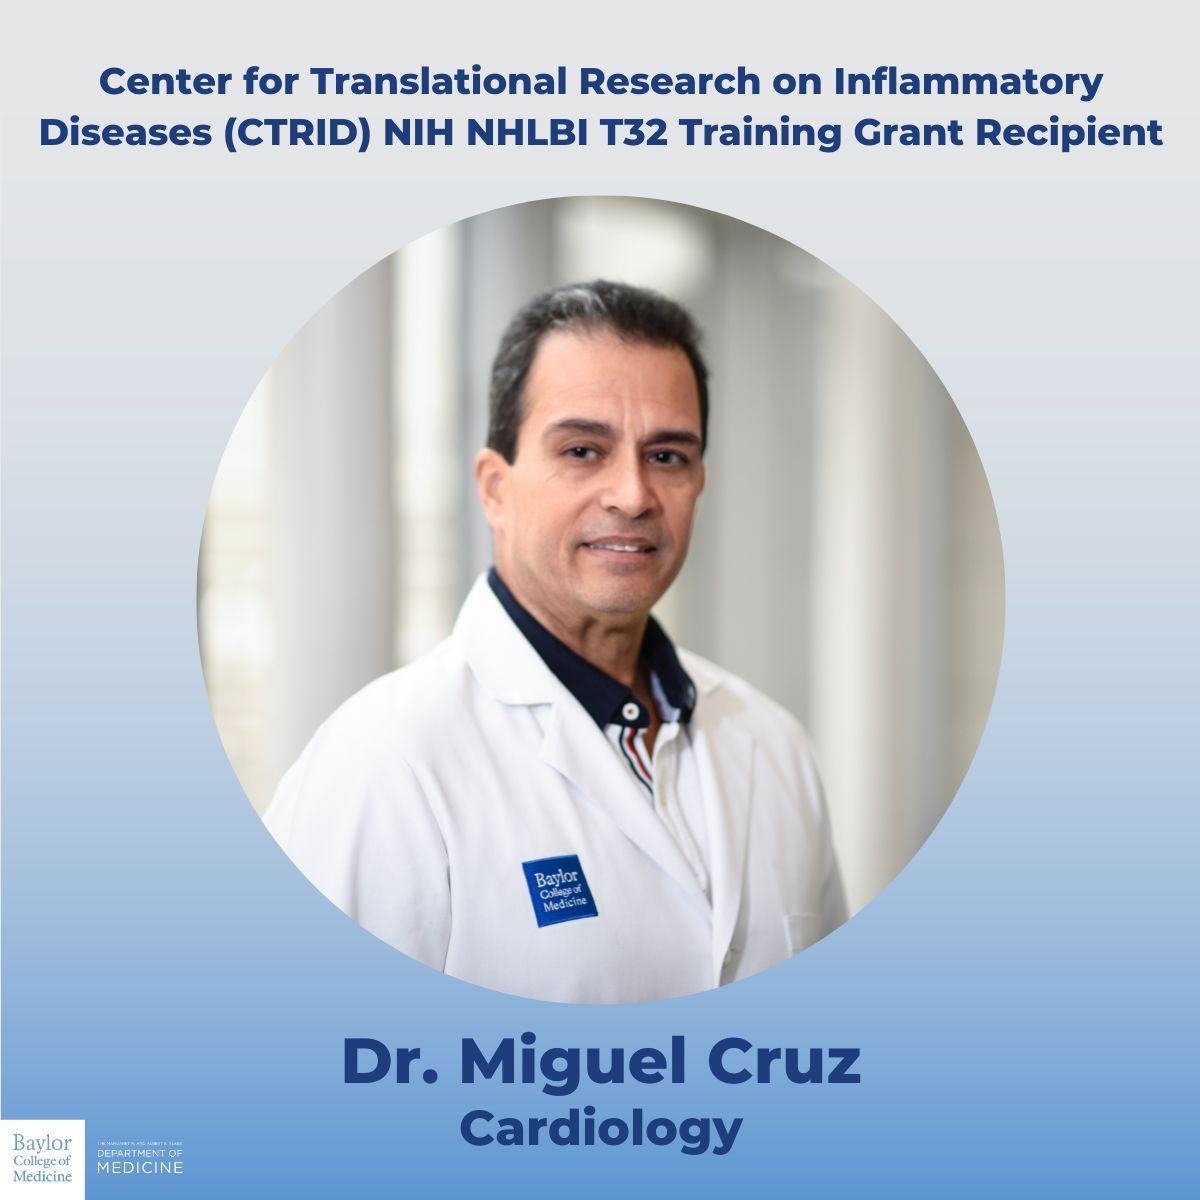 Congratulations to Dr. Rolando Rumbaut and Dr. Miguel Cruz on receiving renewal for the Center for Translational Research on Inflammatory Diseases (CTRID) NIH NHLBI T32 training grant! 👏🏆 #BCMDoM